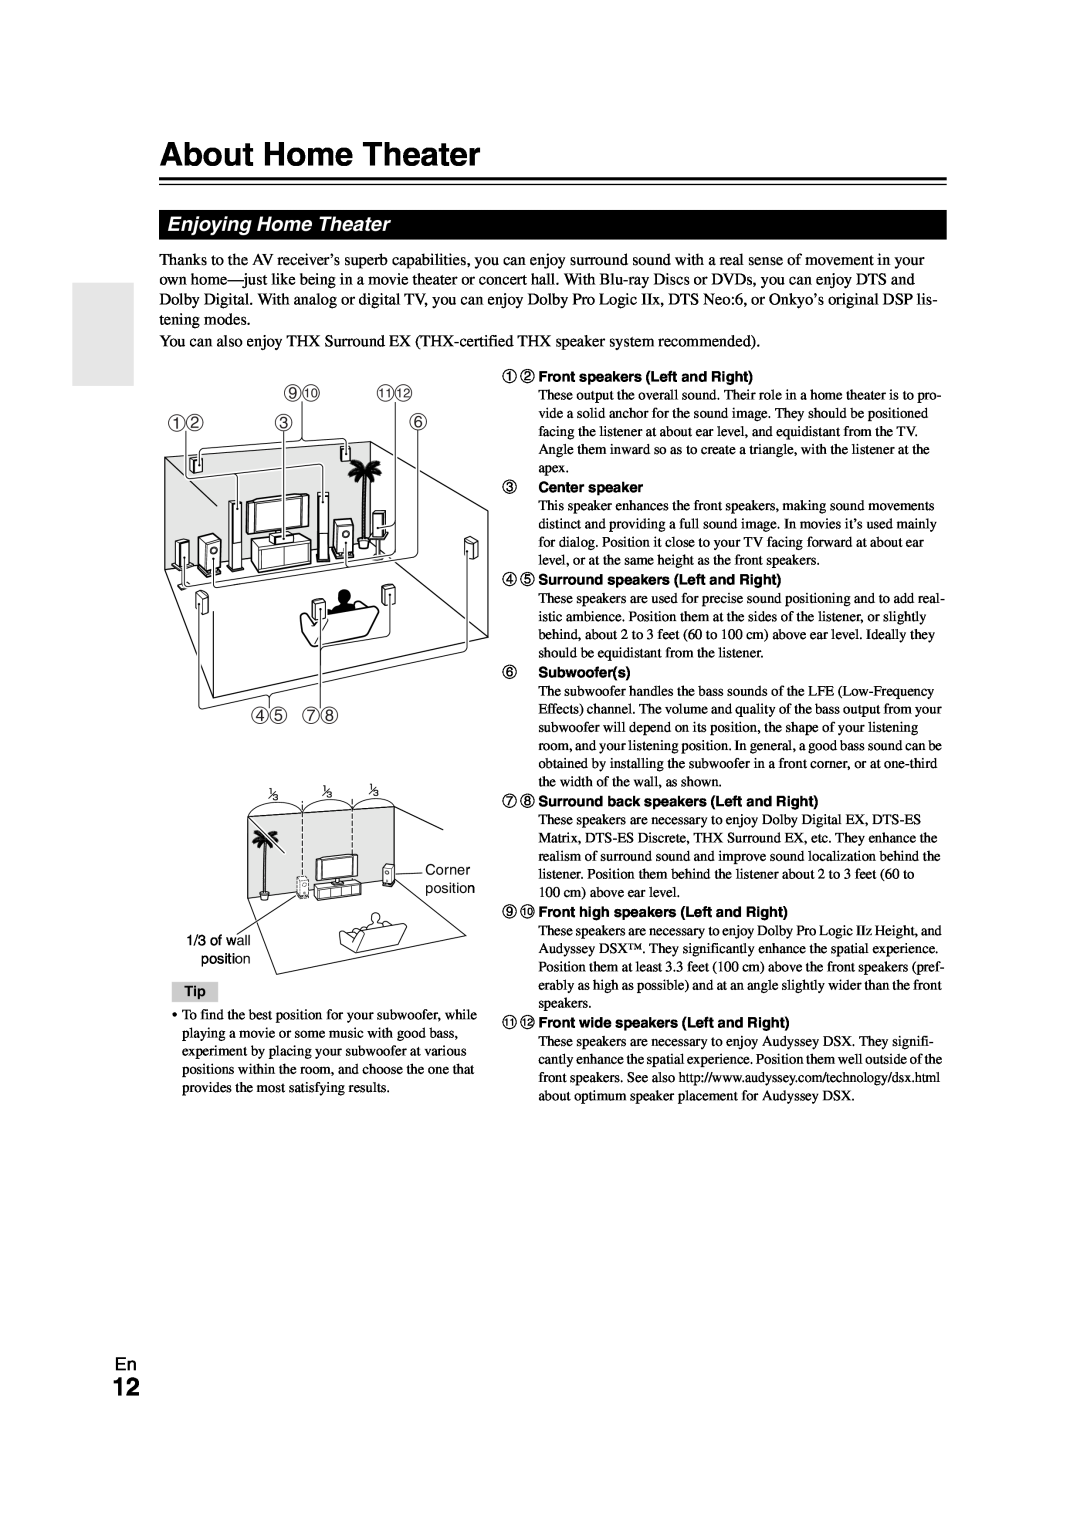 Onkyo TX-NR808 instruction manual About Home Theater, Enjoying Home Theater, ij kl, de gh 